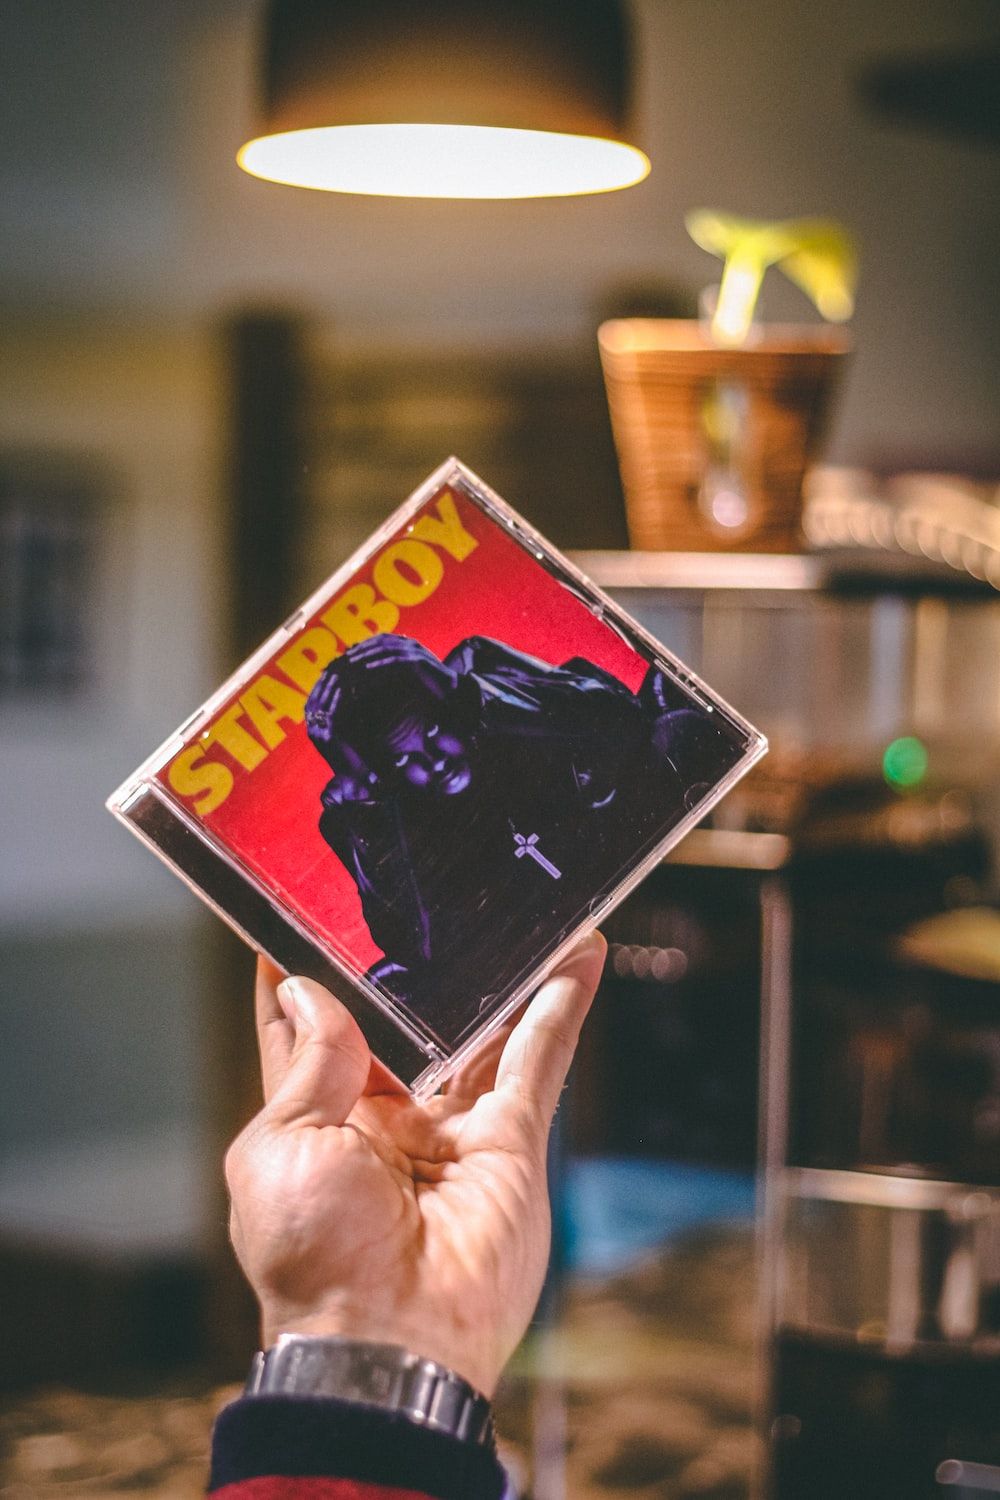 A person holding up an album cover - The Weeknd